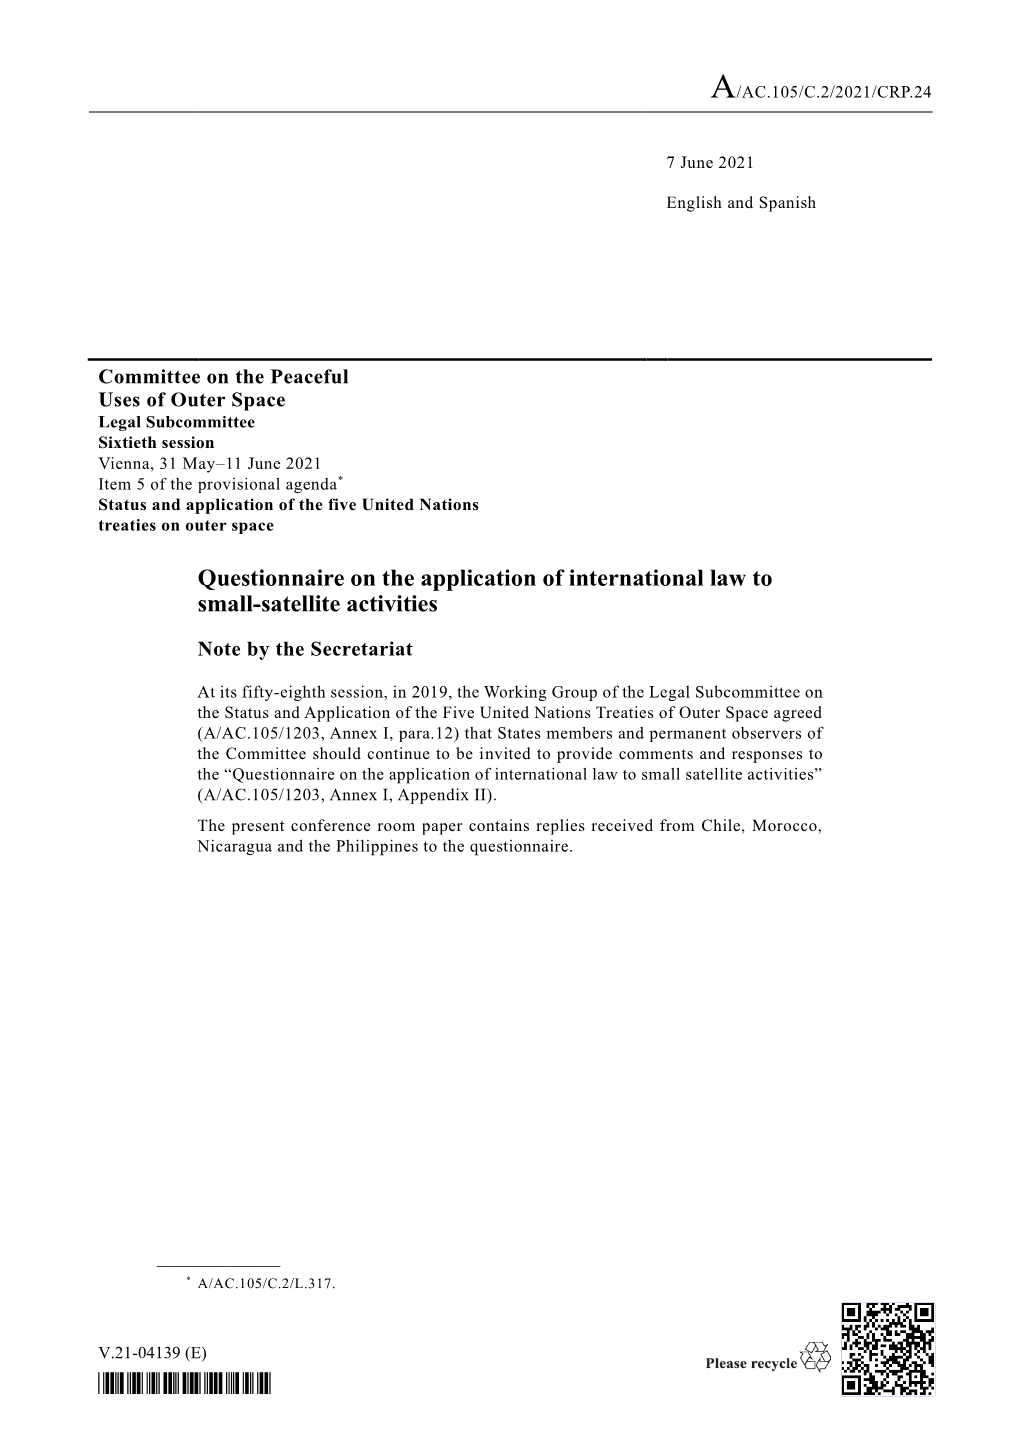 Questionnaire on the Application of International Law to Small-Satellite Activities